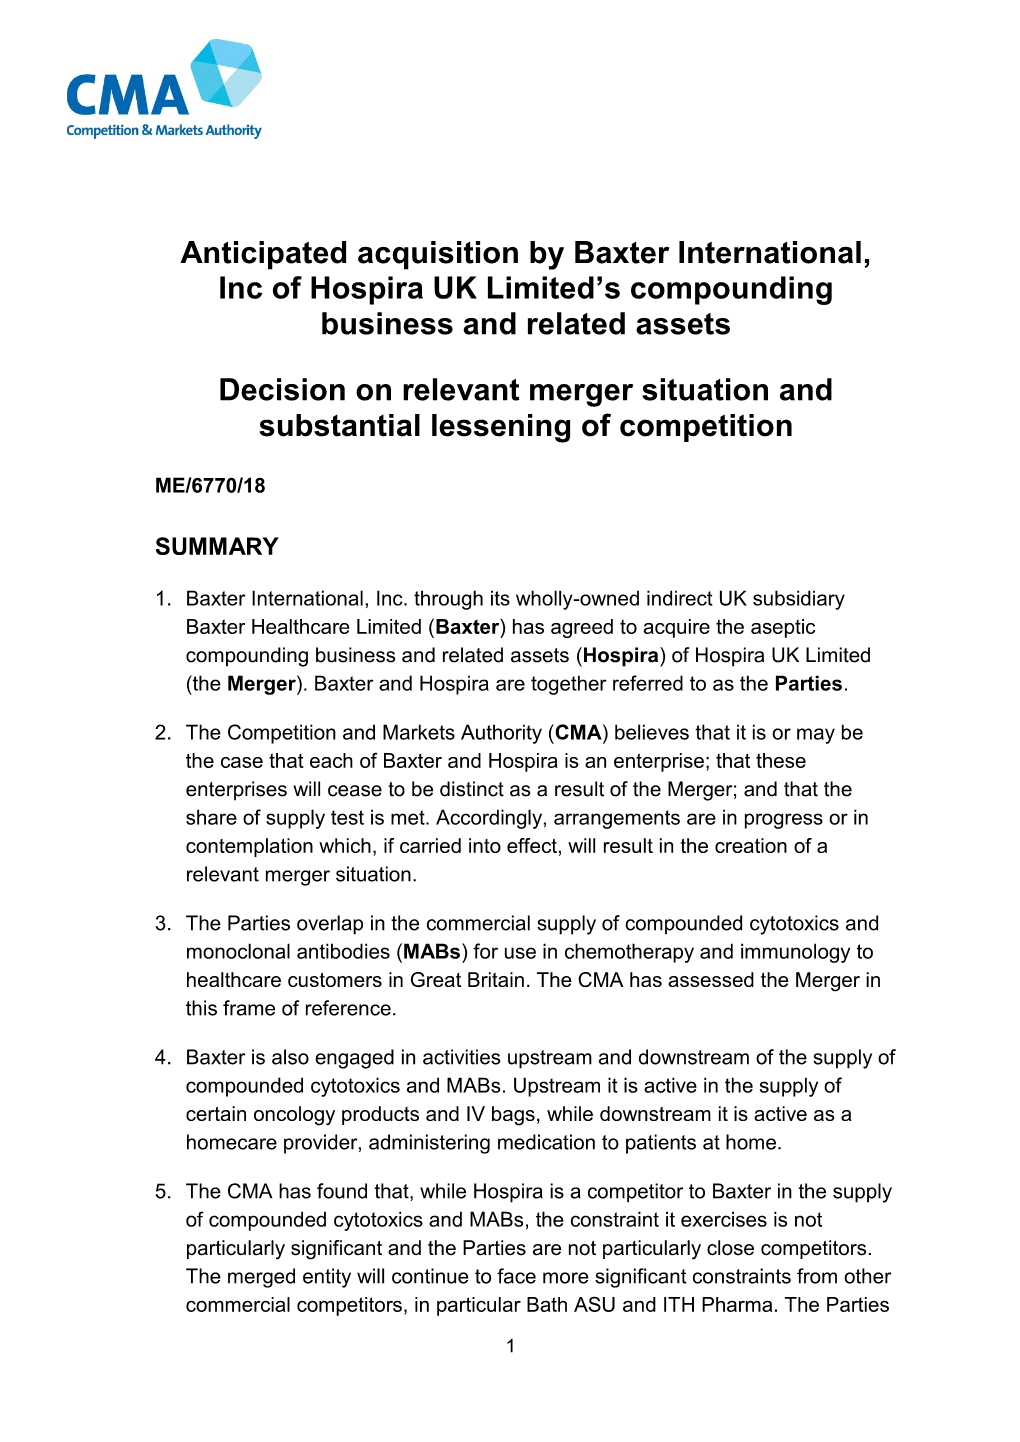 Anticipated Acquisition by Baxter International, Inc of Hospira UK Limited’S Compounding Business and Related Assets